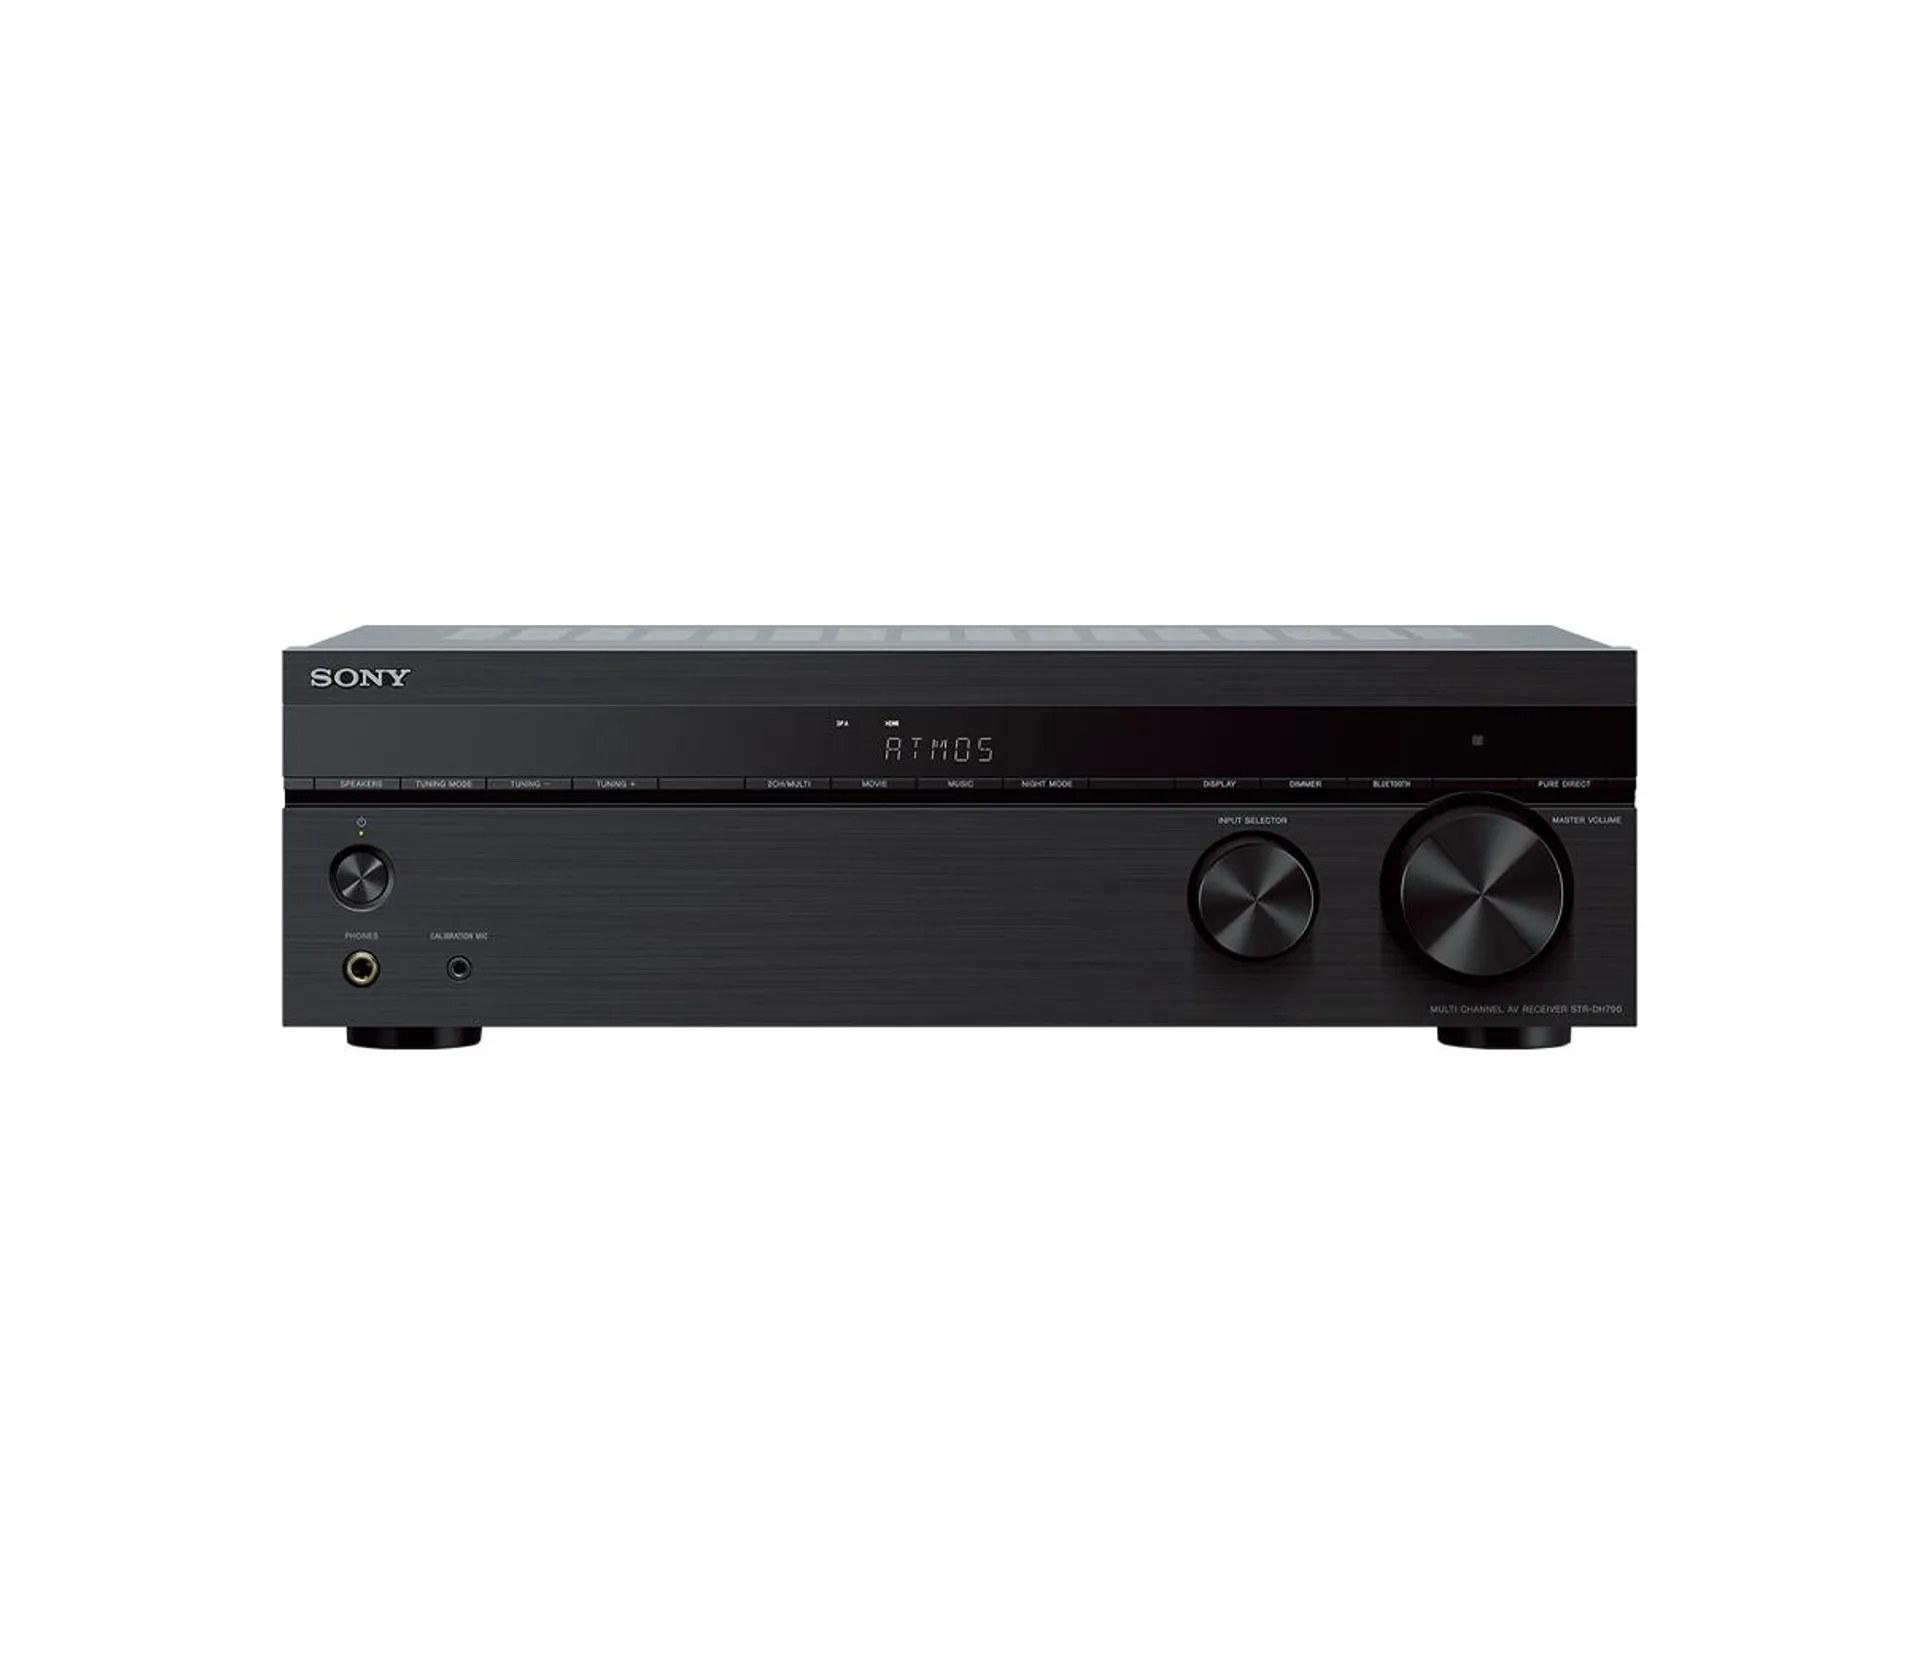 STR-DH790 7.2ch Home Theater AV Receiver with Dolby Atmos